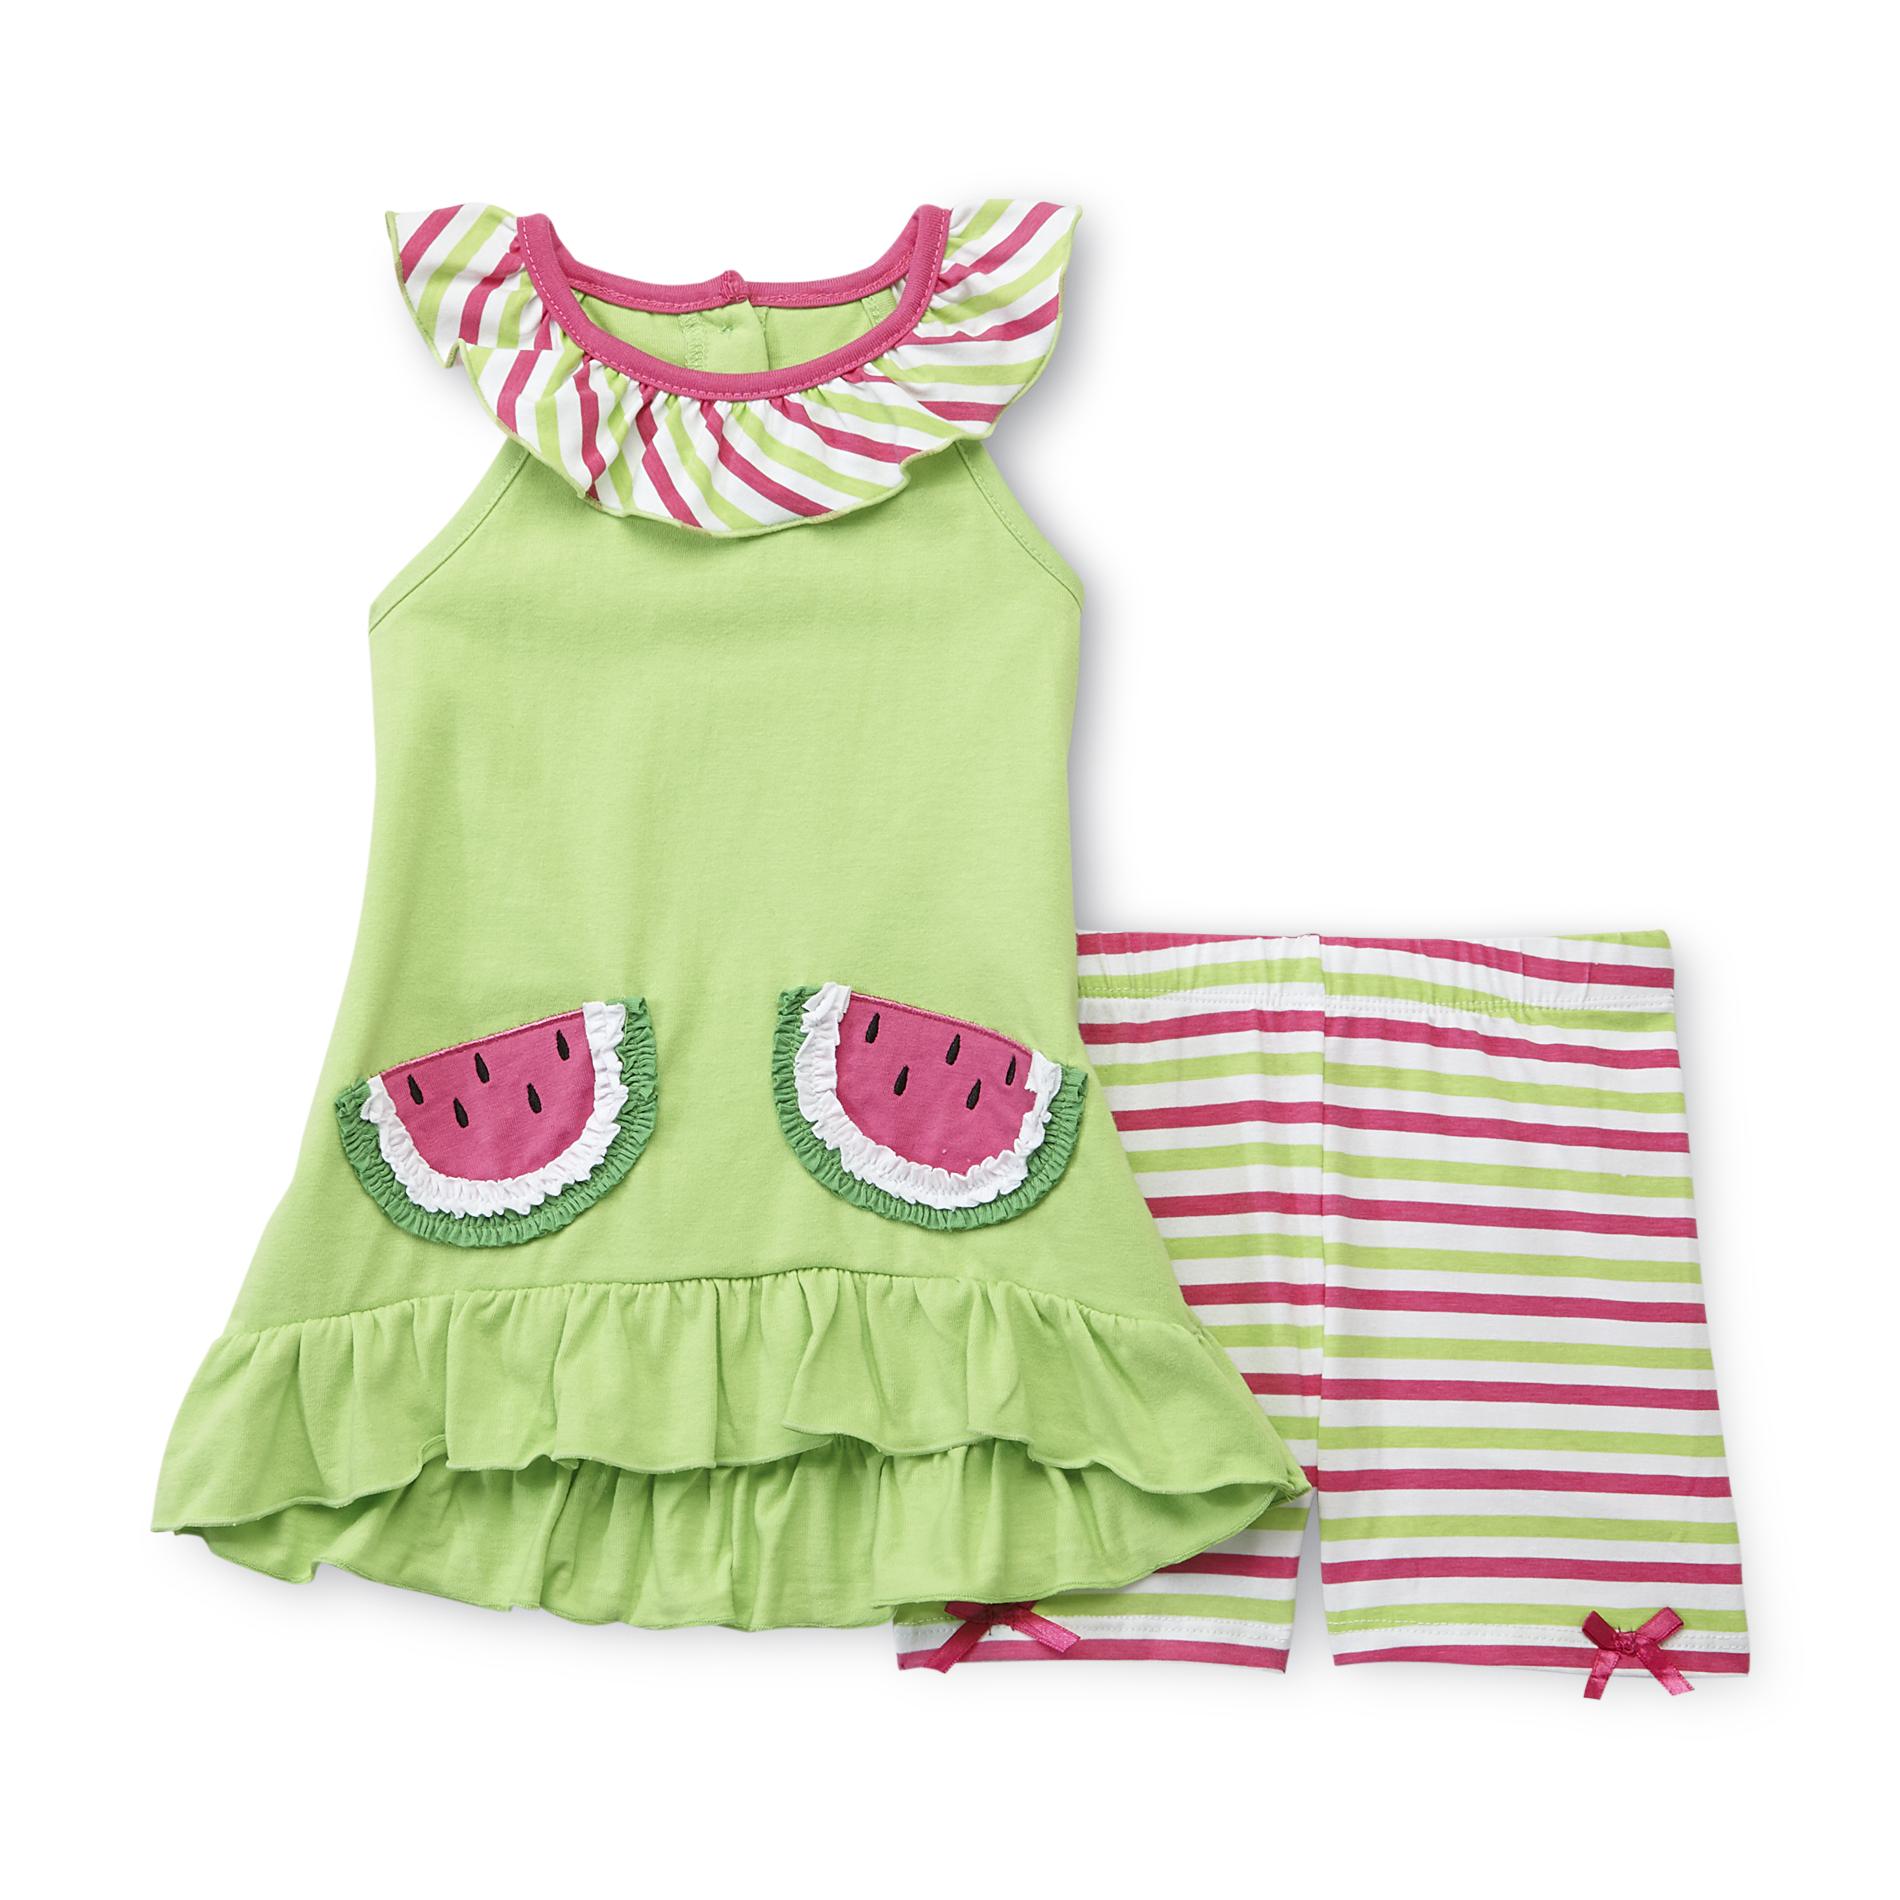 Young Hearts Infant & Toddlers Girl's Sleeveless Top & Shorts - Watermelon